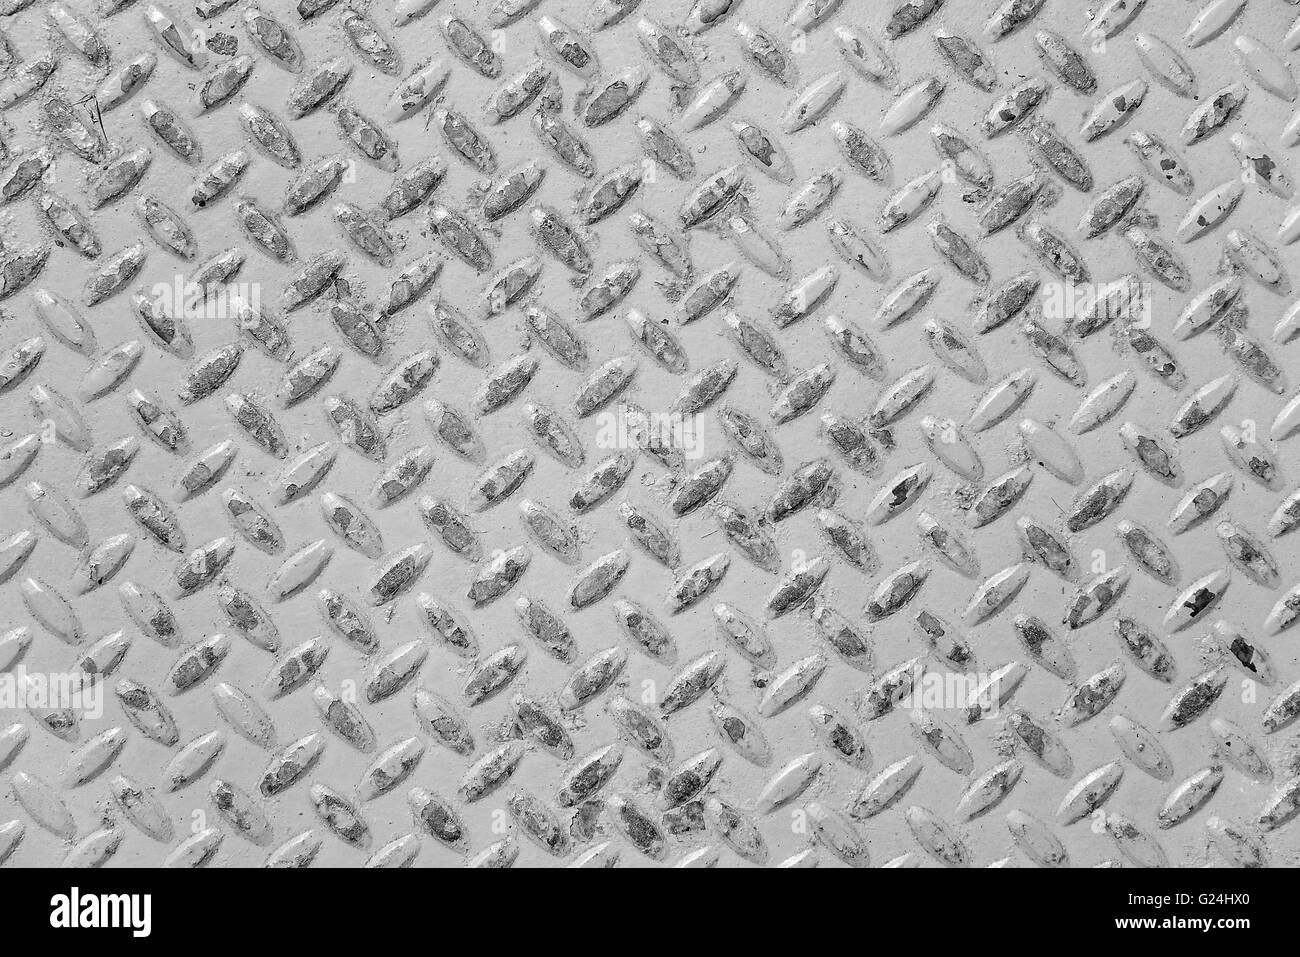 Metal plate abstract background in silver color. Stock Photo